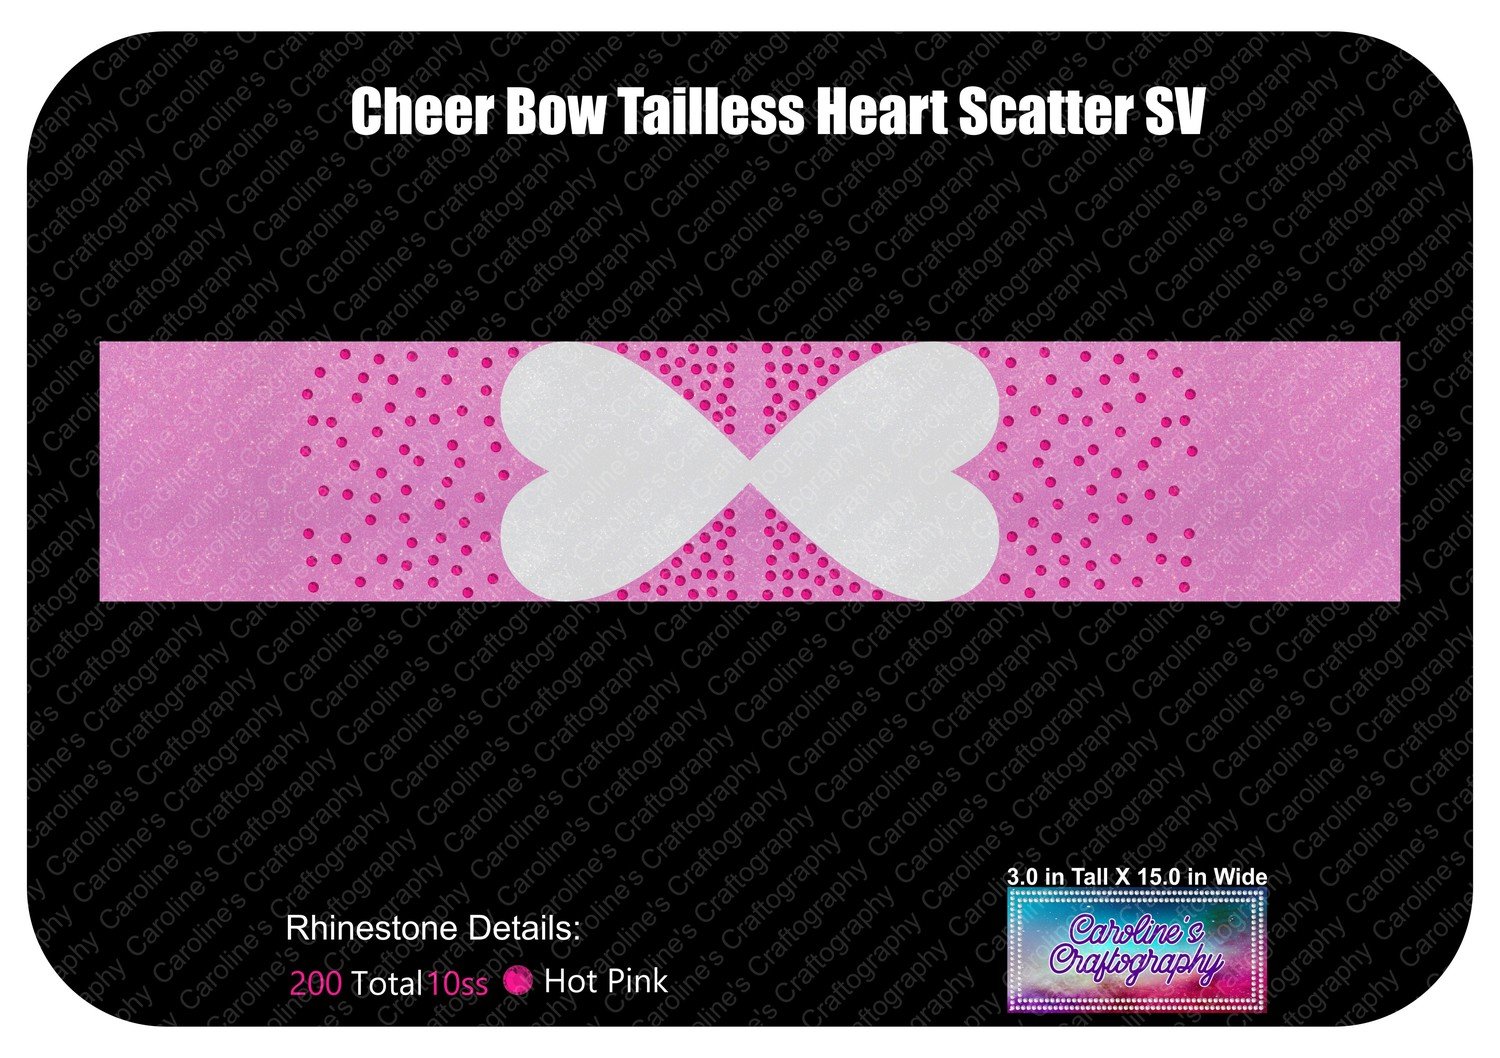 Tailless Cheer Bow Heart Scatter 3in Stone Vinyl